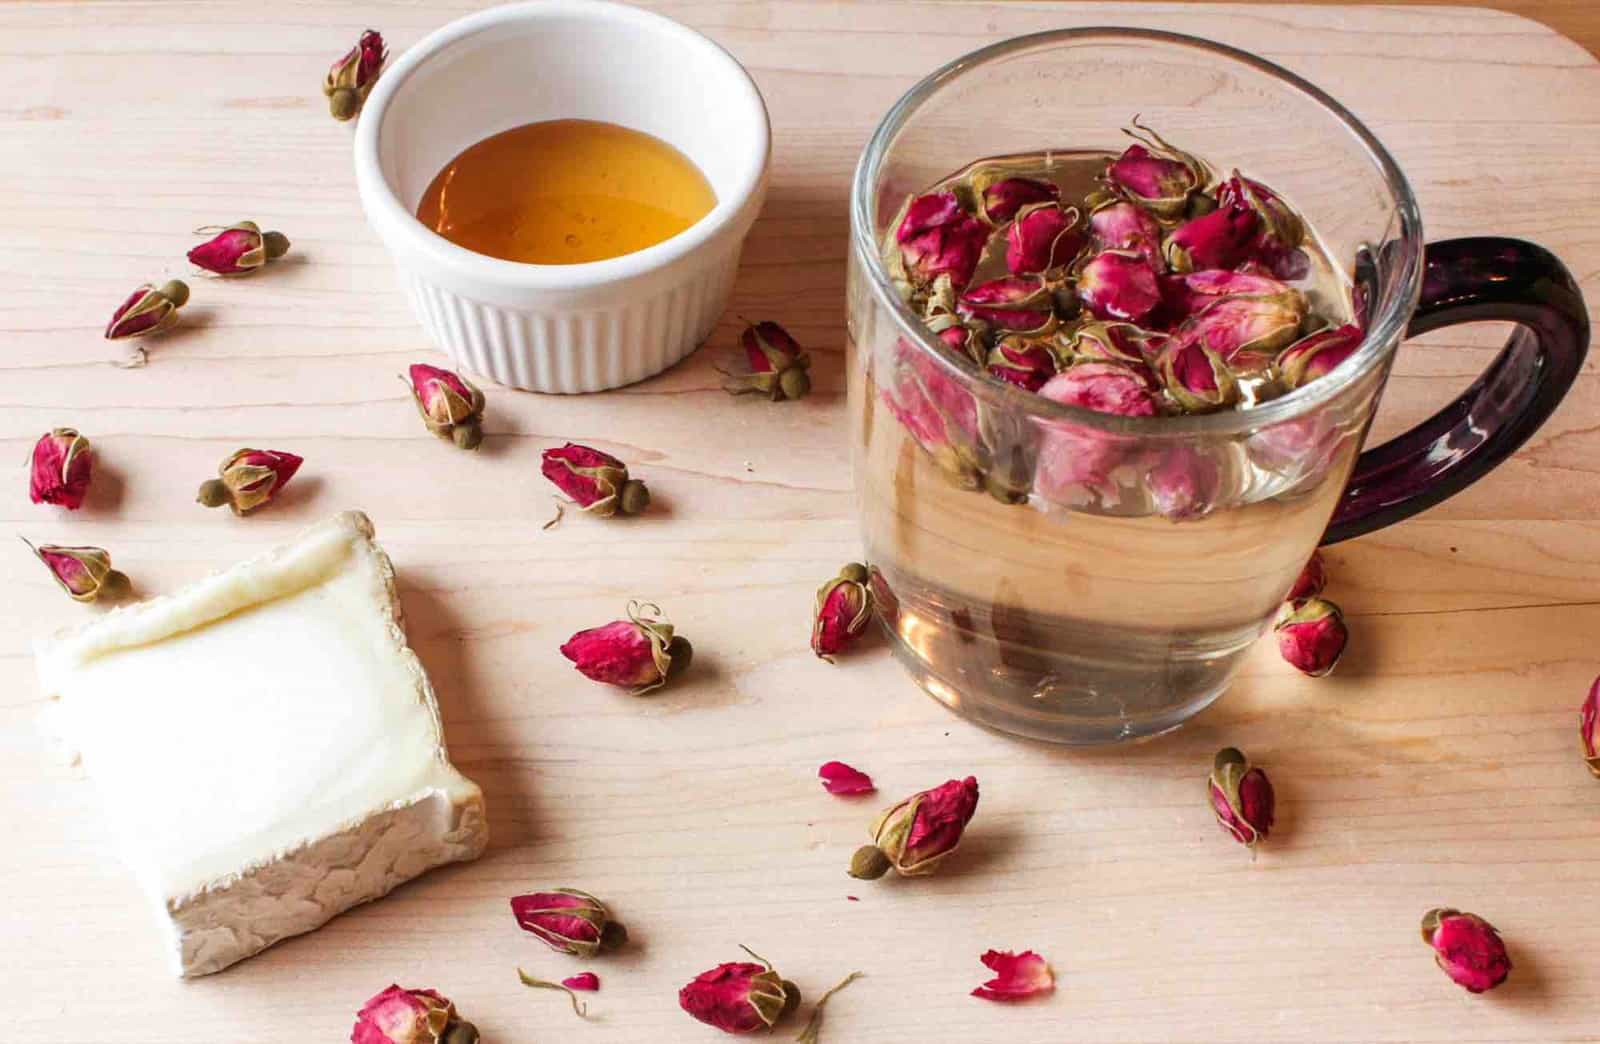 cheese and flowers- rose and honey